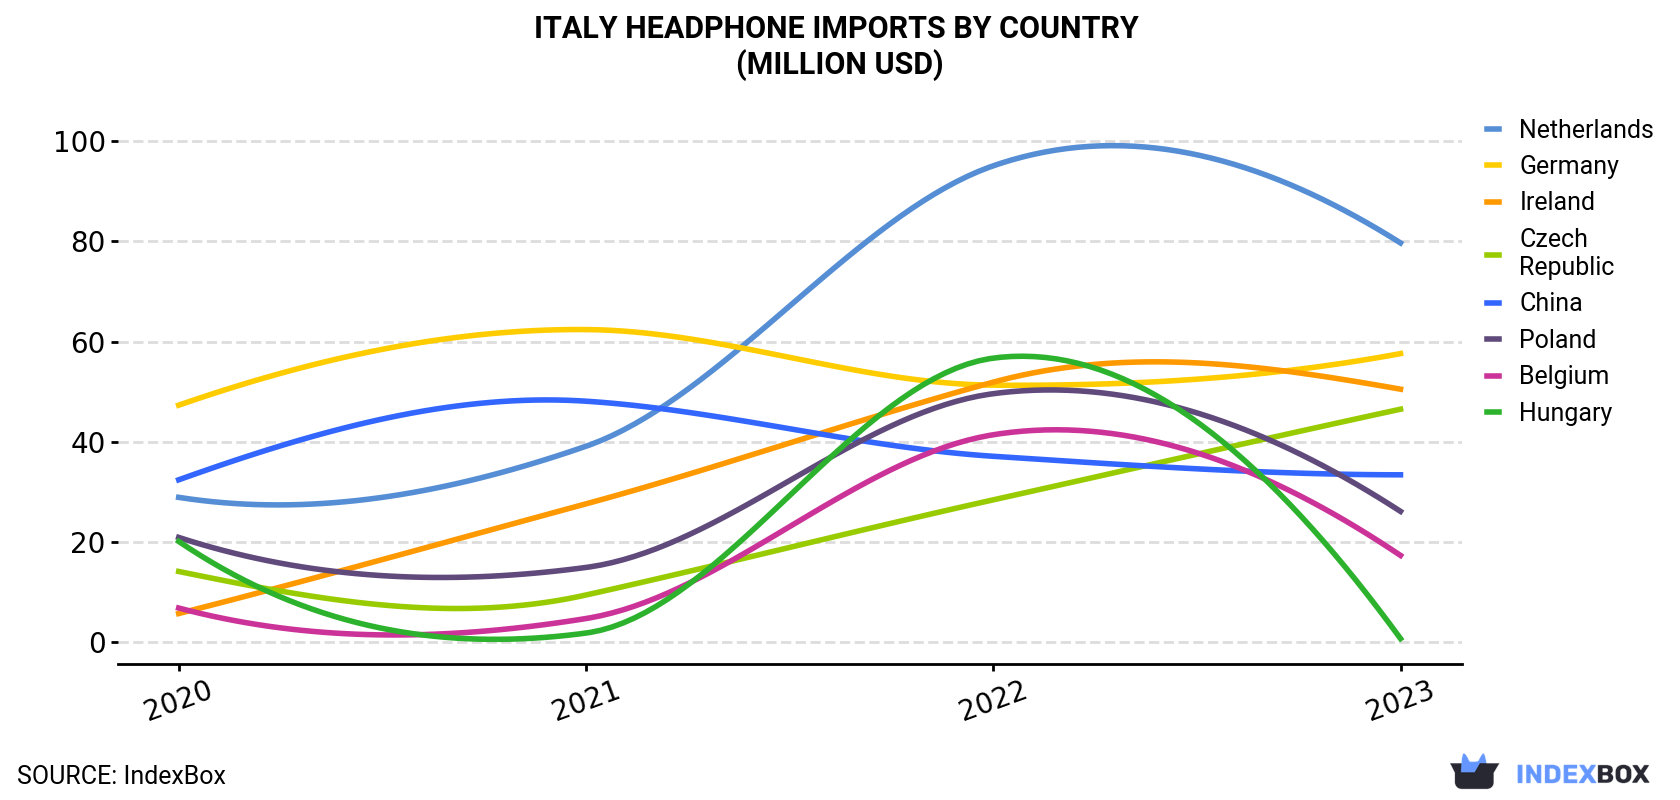 Italy Headphone Imports By Country (Million USD)